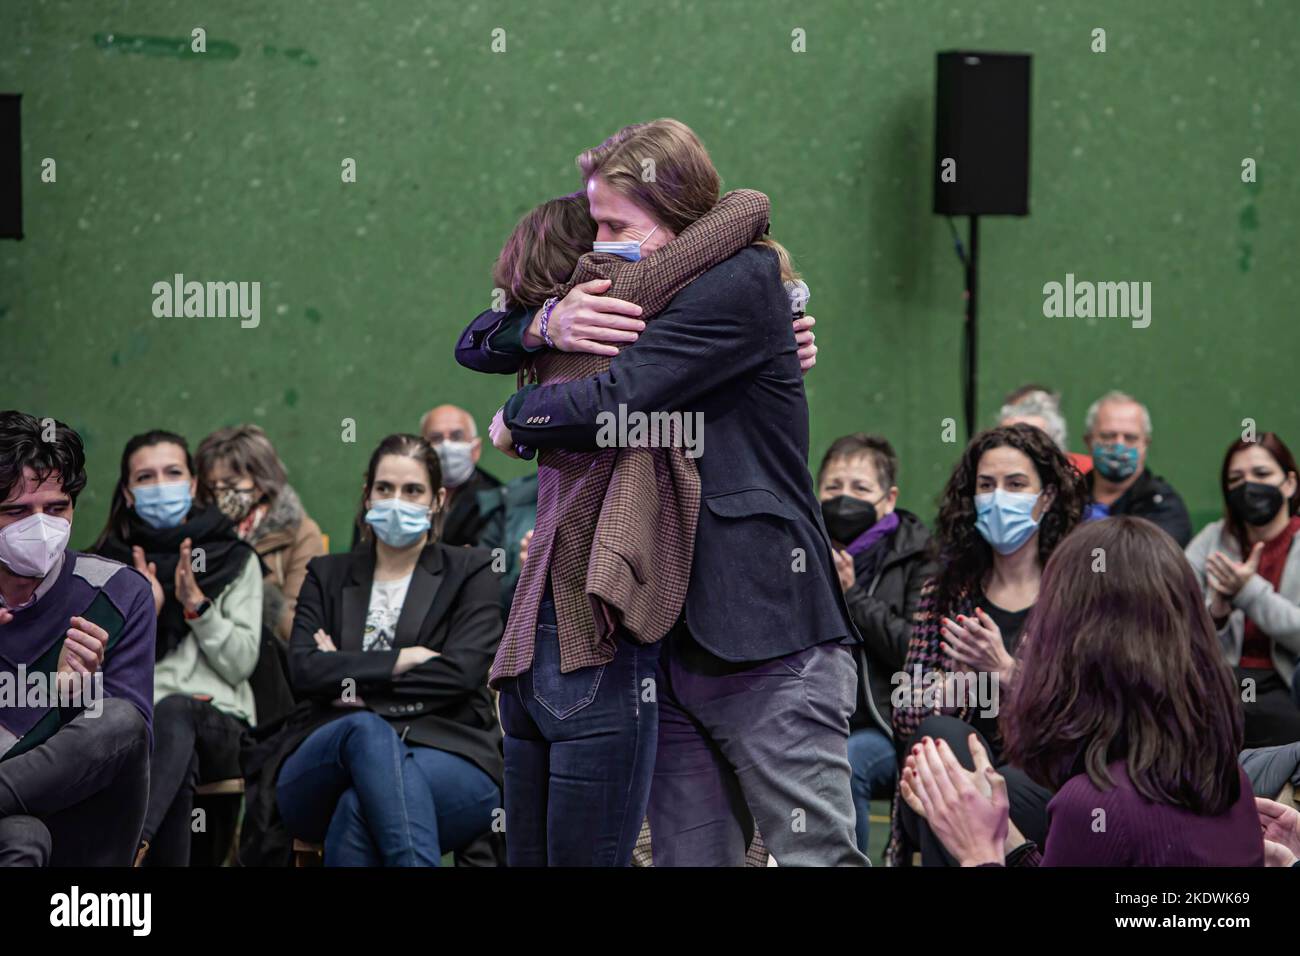 Irene Montero, Minister of Equality, hugs the future President of the Junta de Castilla y León, Pablo Fernández during the campaign rally in Burgos. The political party Unidos Podemos also known as United We Can, held a massive rally at the Gamonal neighborhood for the elections on February 23. Stock Photo